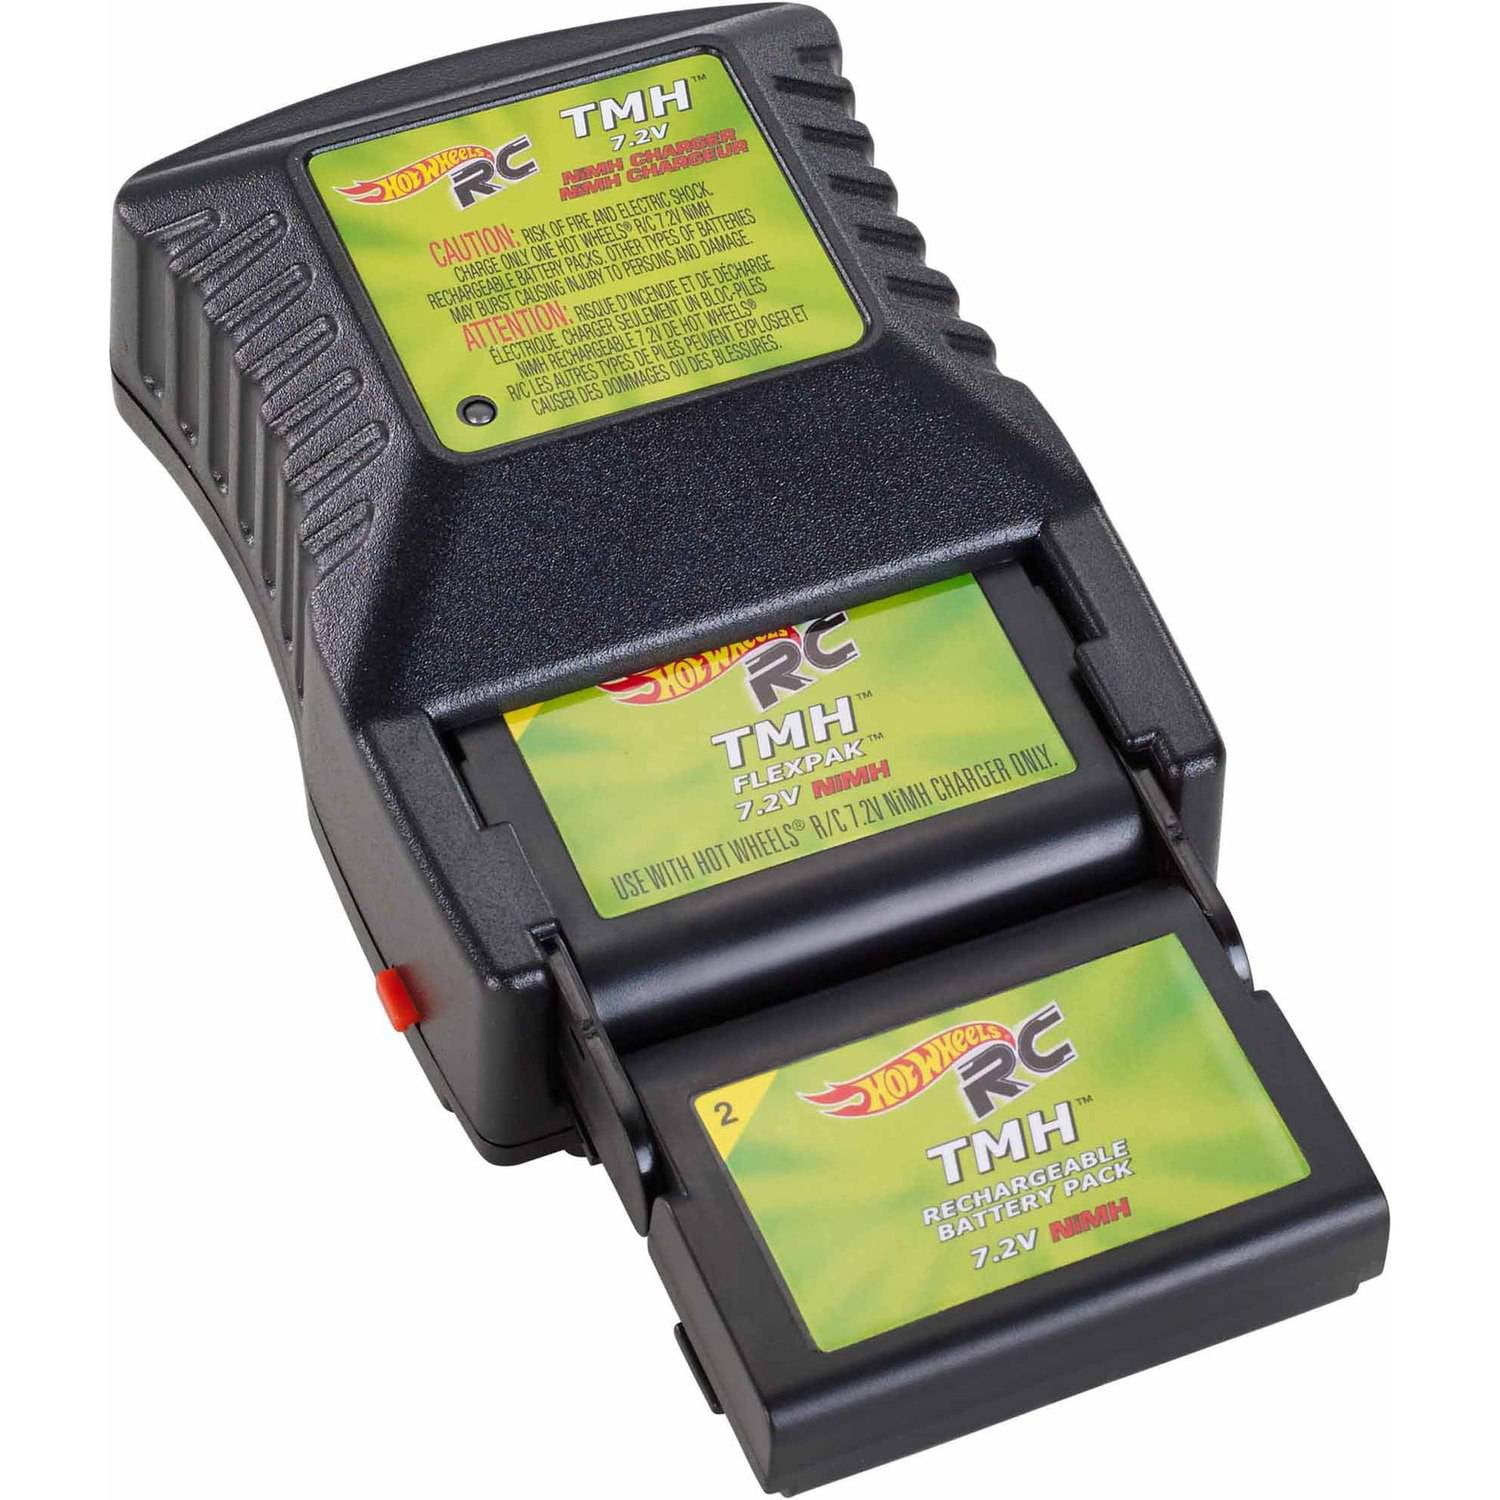 terrain twister battery charger